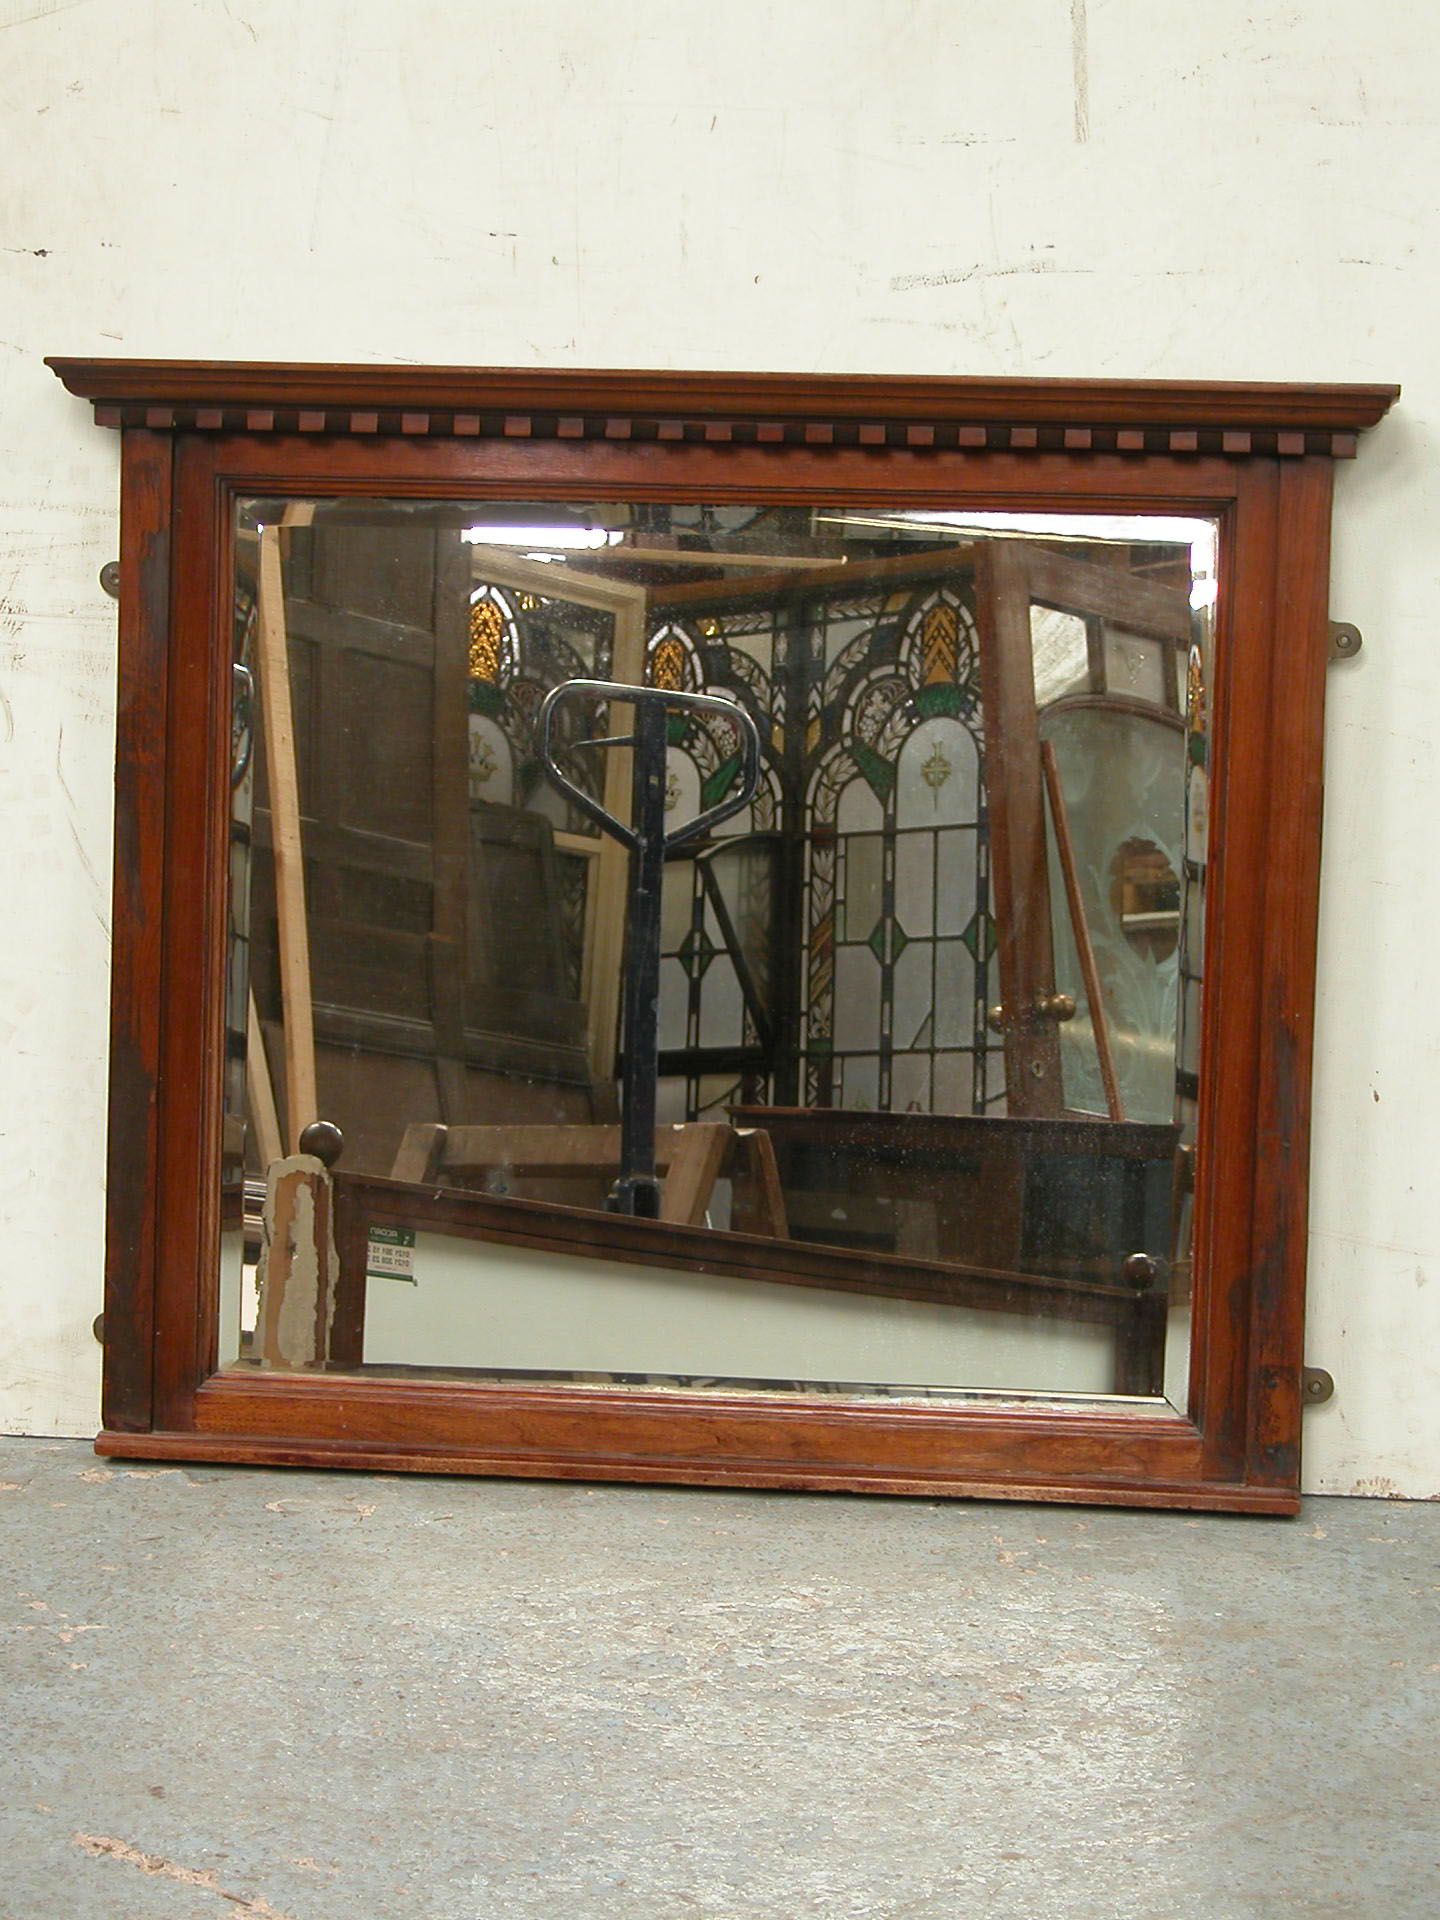 *VICTORIAN MAHOGANY FRAMED BEVELLED MIRROR WITH DENTIL CORNICE. HEIGHT 810MM (32IN) X WIDTH 980MM (